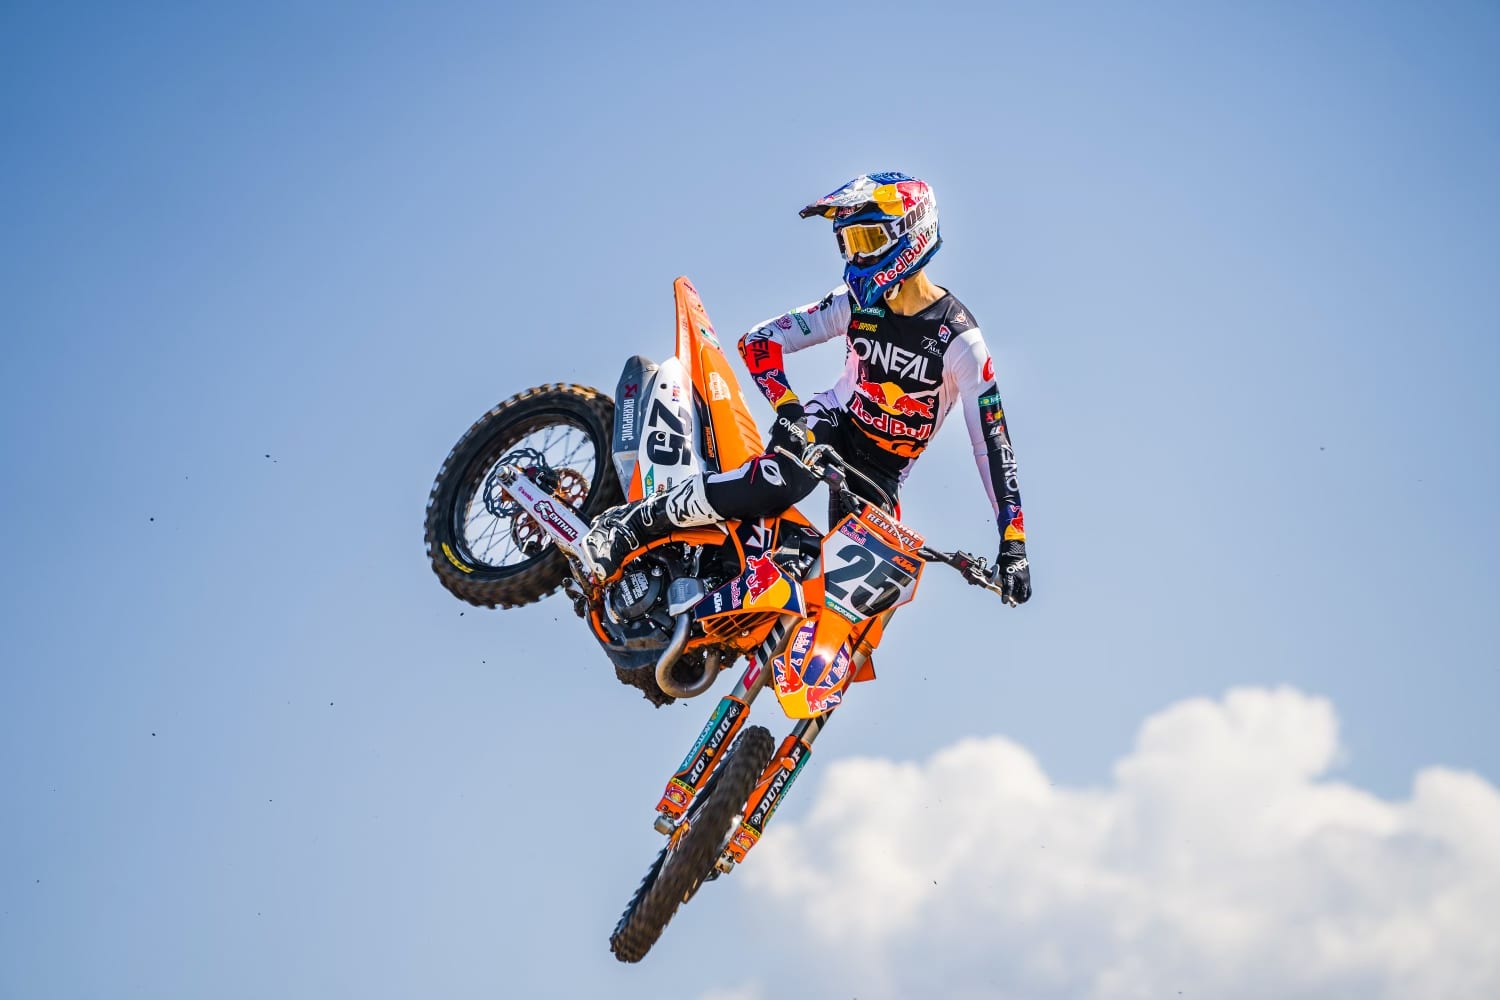 ONEAL_MarvinMusquin_Web-01363